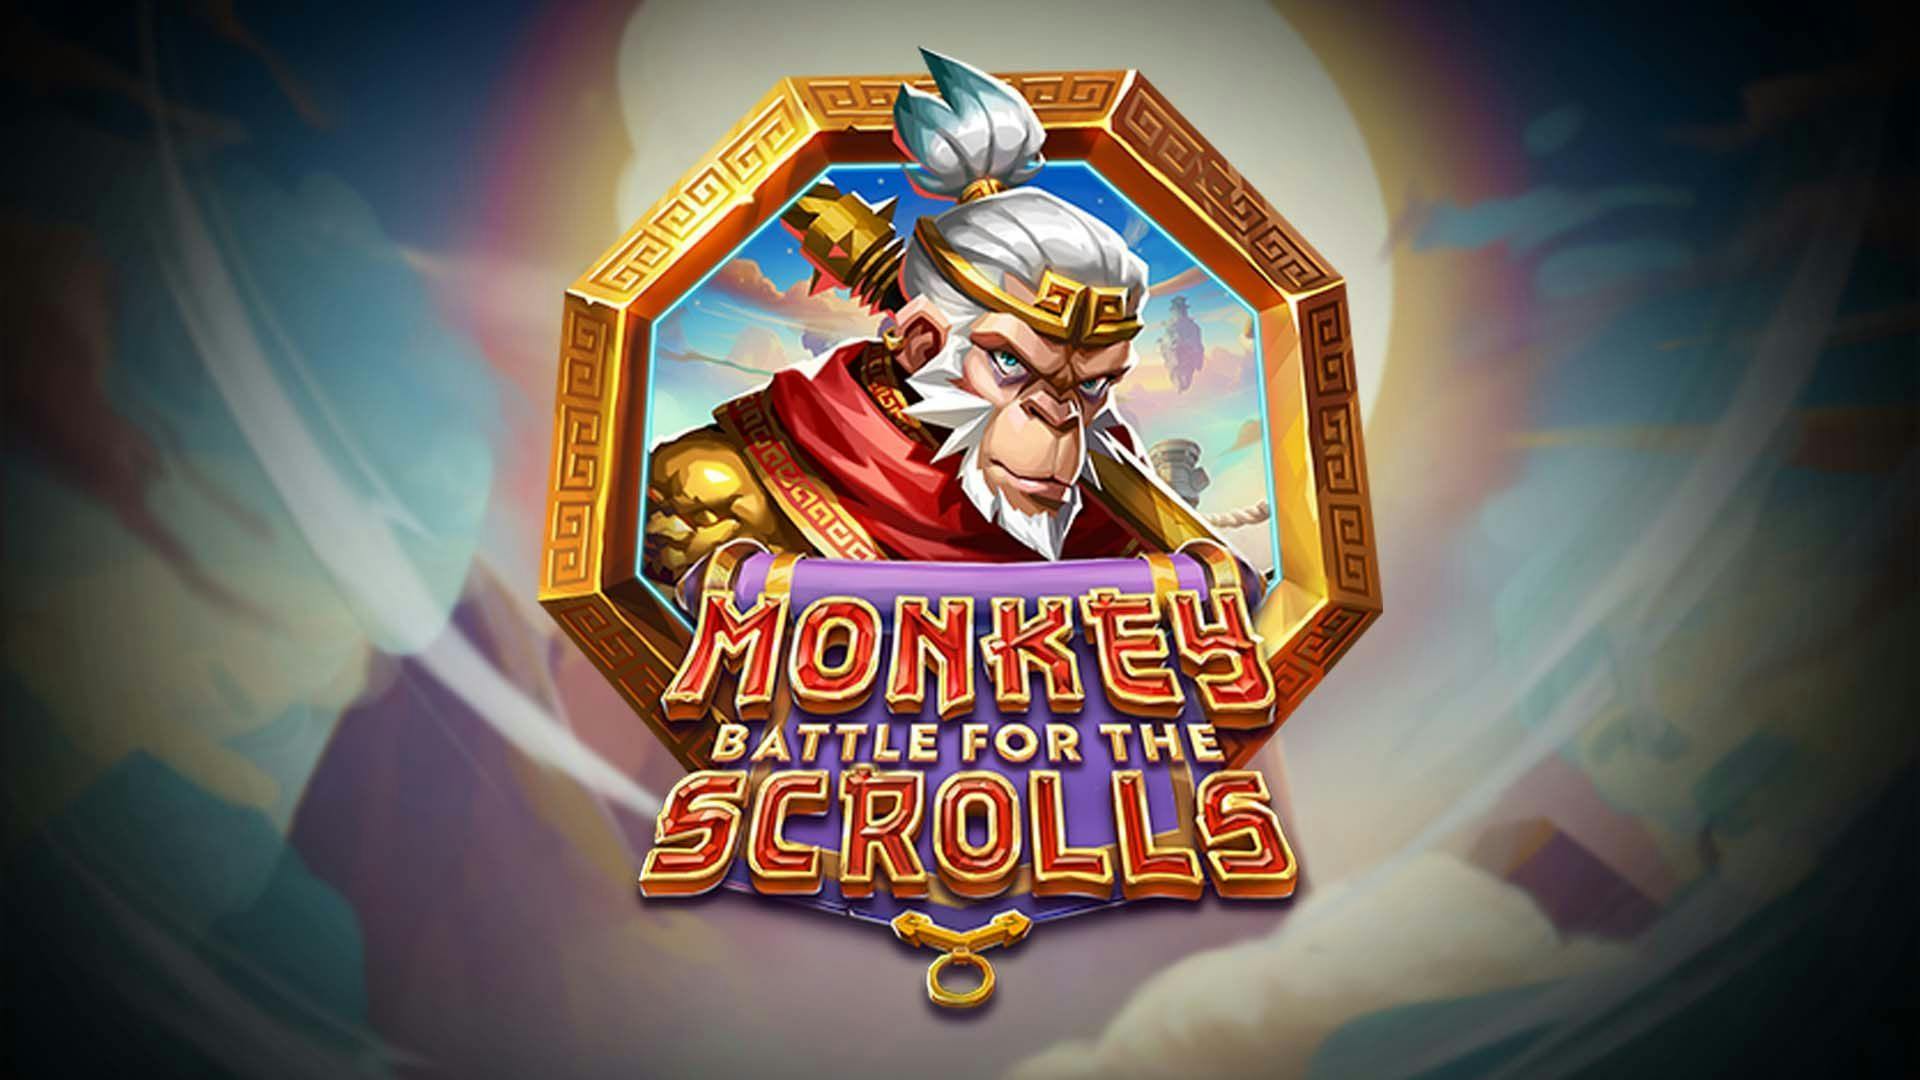 Monkey: Battle For The Scrolls Slot Machine Online Free Game Play